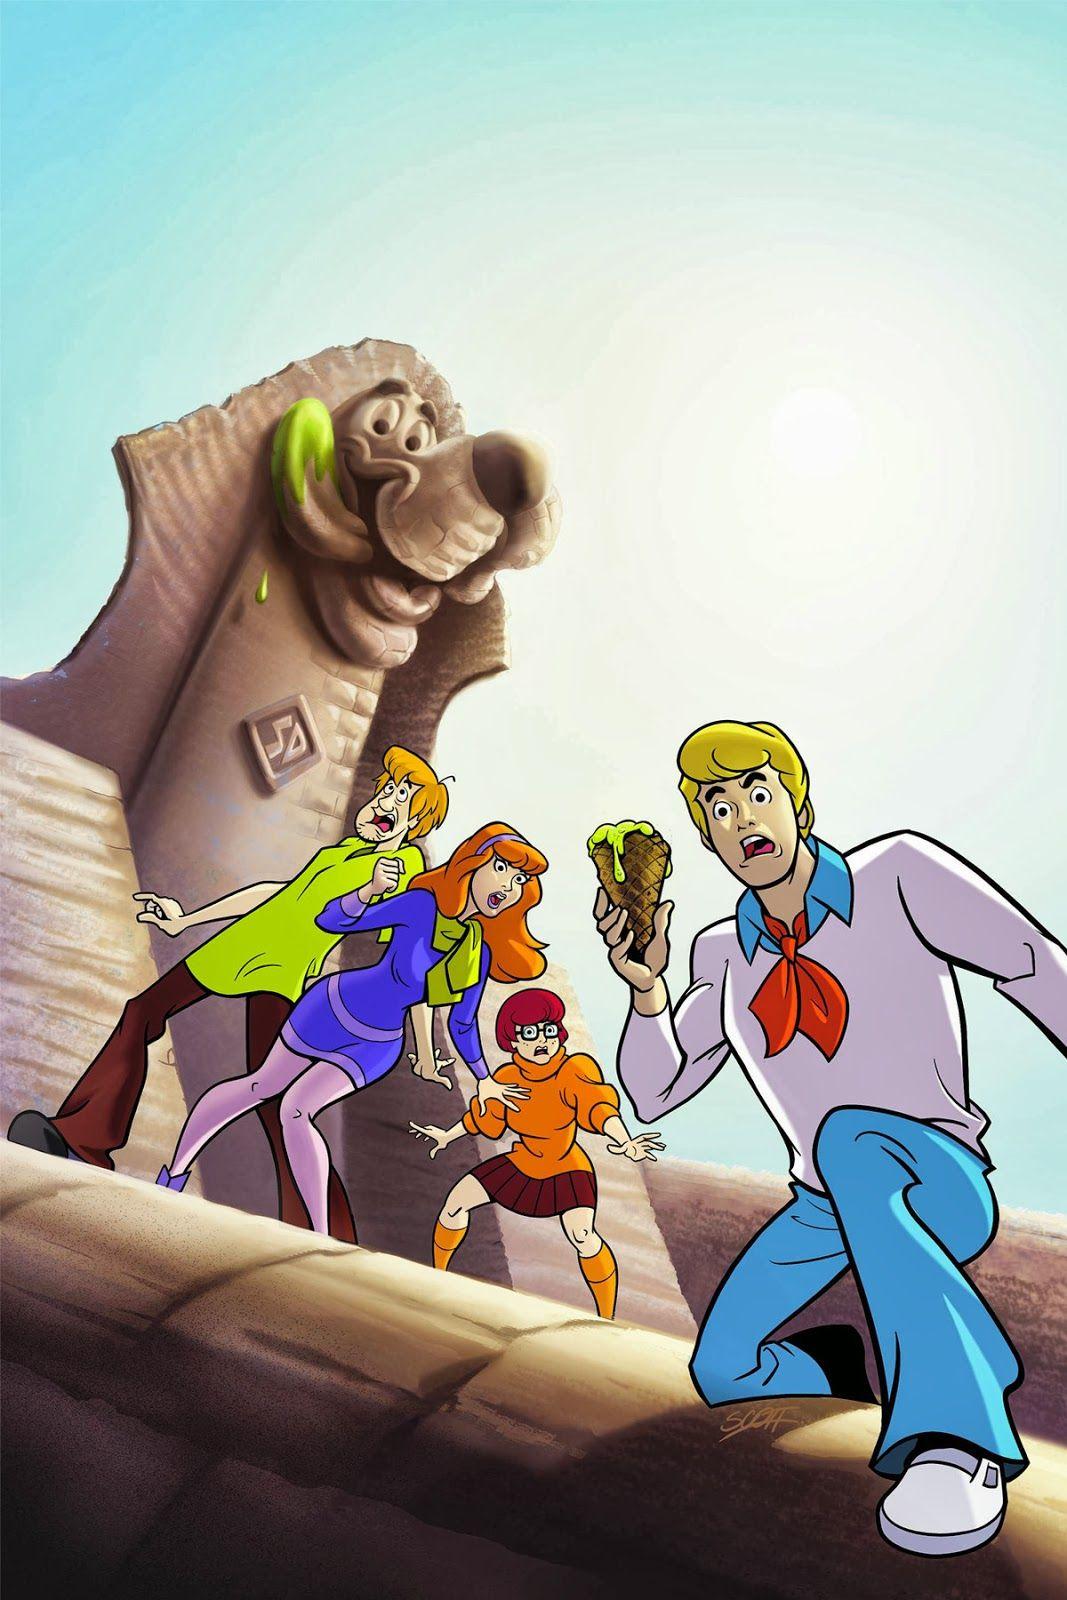 Scooby doo wallpaper I found and really love credit Ladyshadow88 on Zedge   rMobileWallpaper